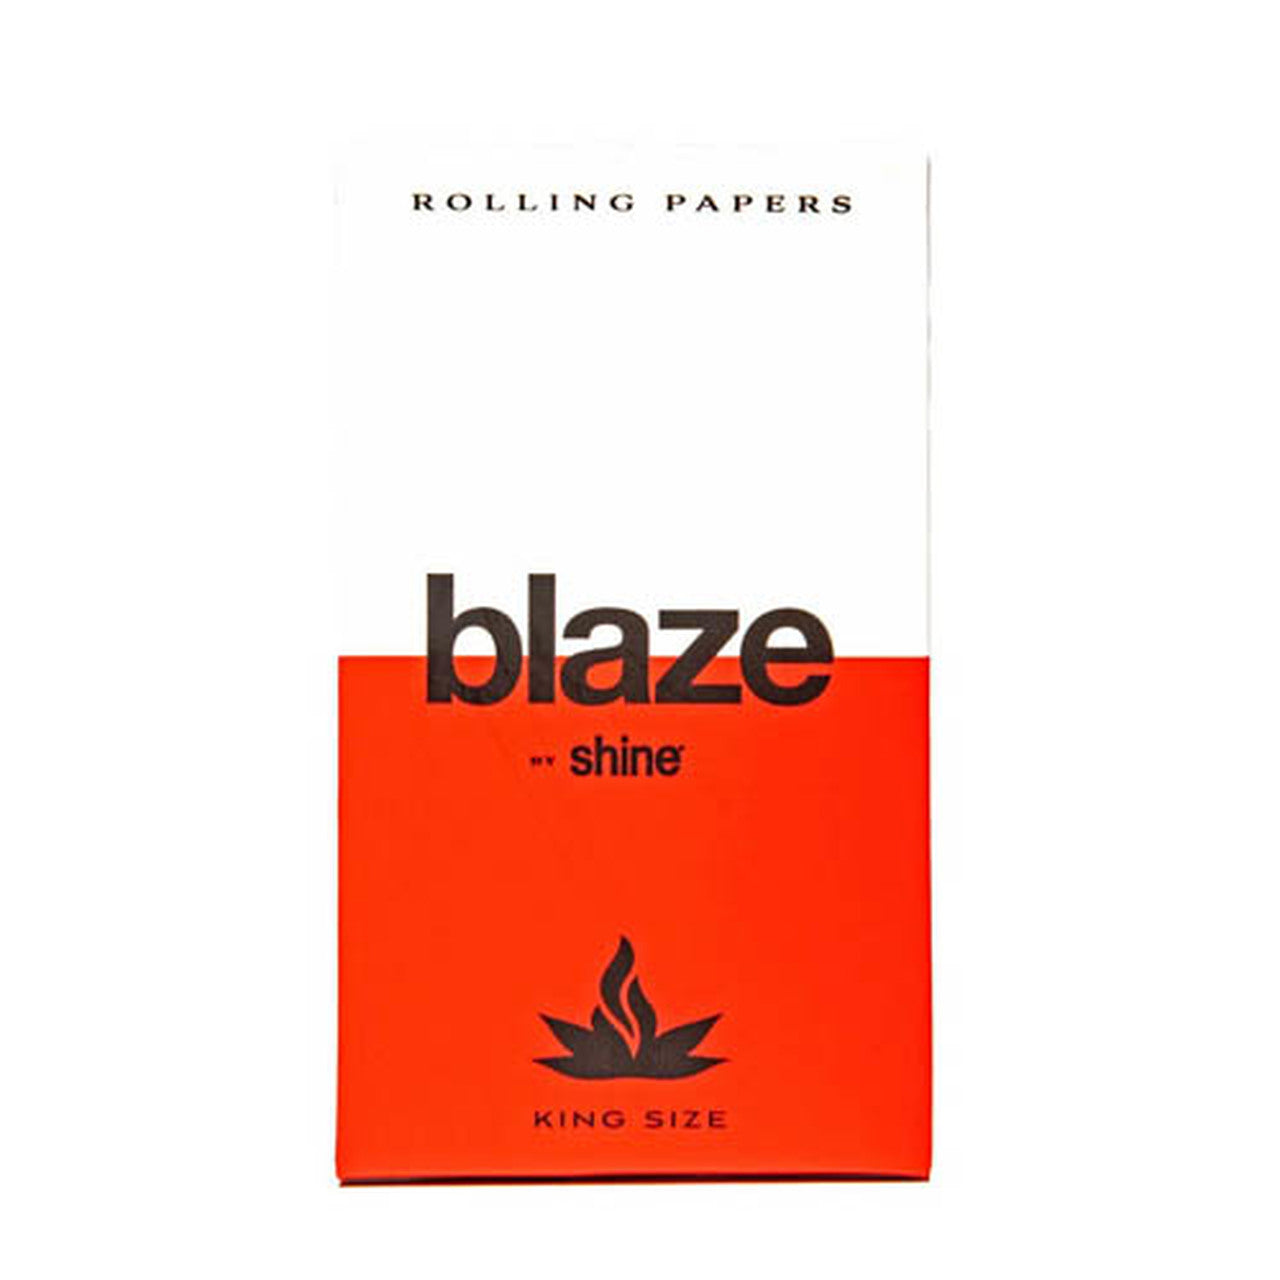 blaze by shine rolling papers king size